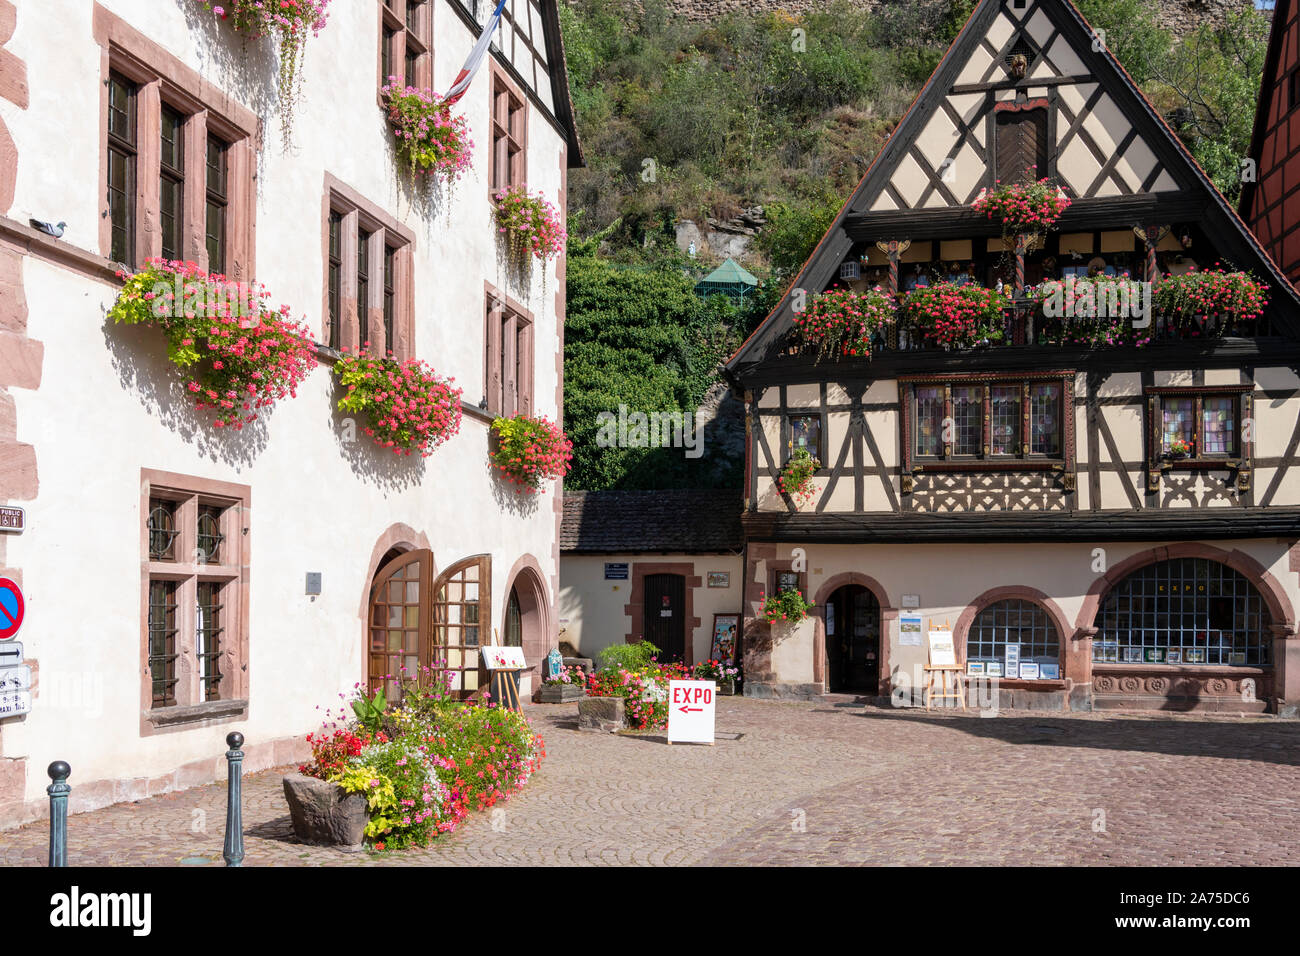 Old half timbered houses and buidlings in the medieval town of Kayserberg  Alsace France Stock Photo